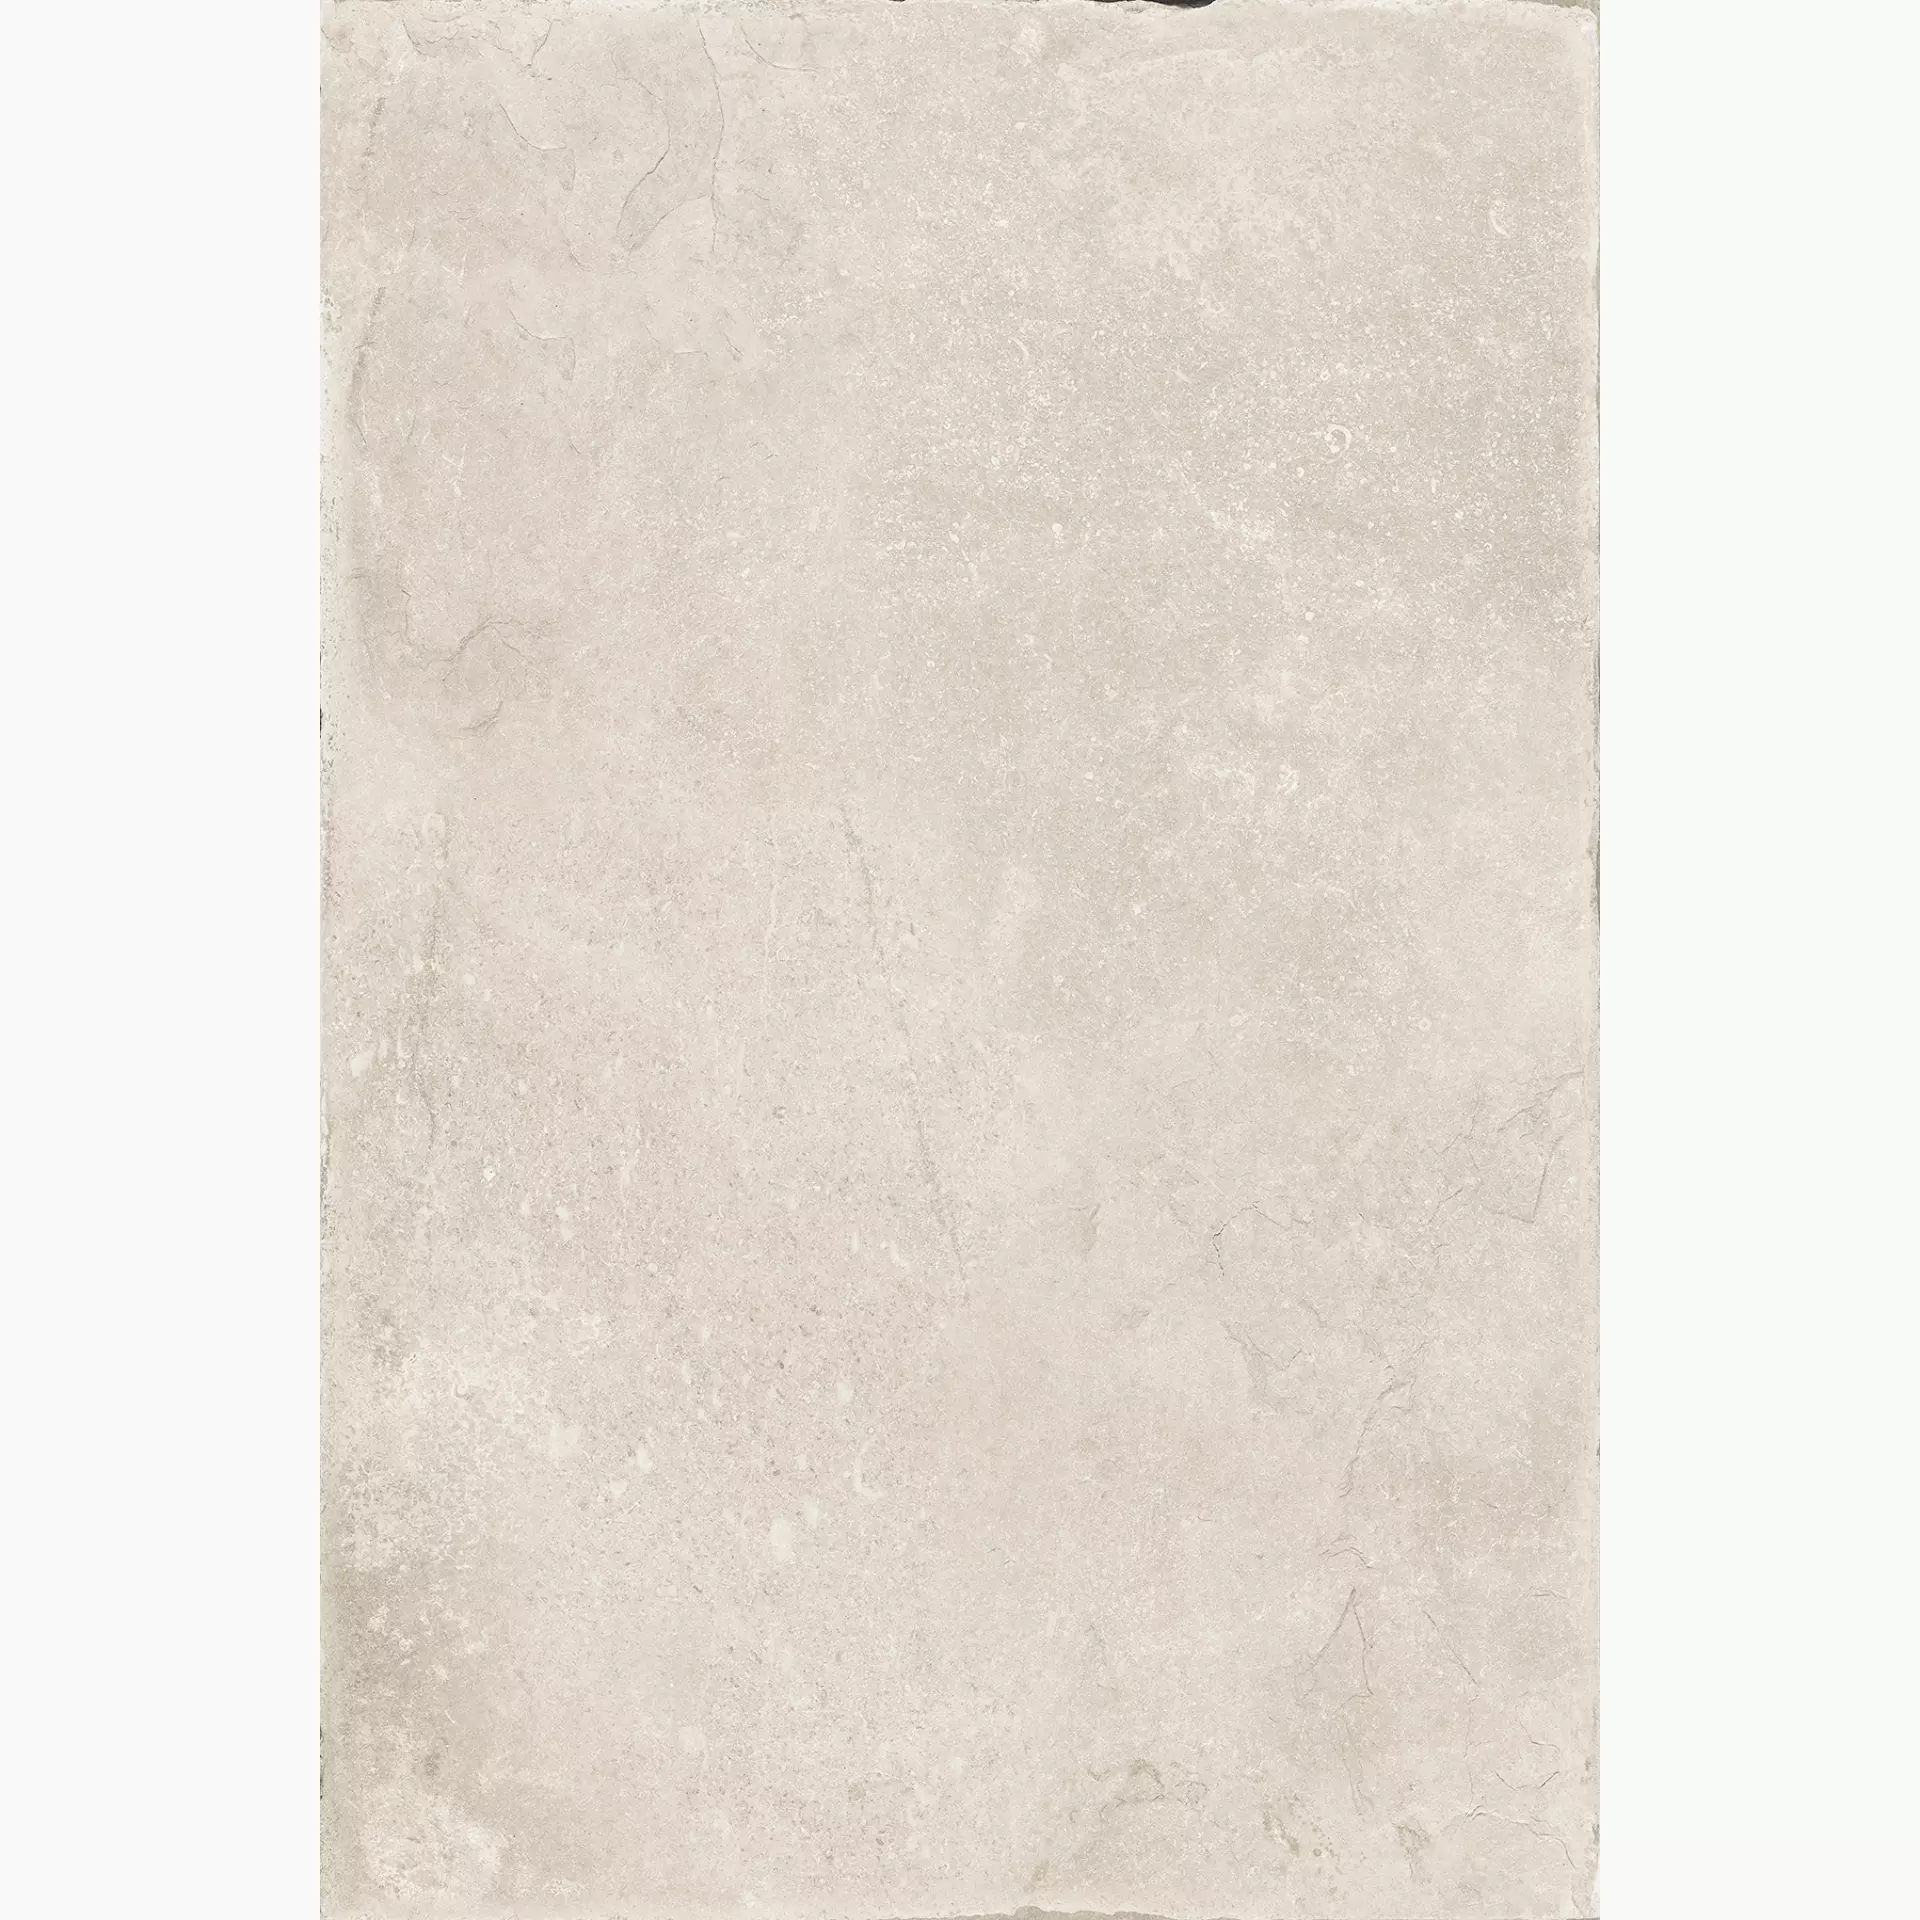 Tagina Namur Blanche Naturale 136007 60x90cm rectified 10mm